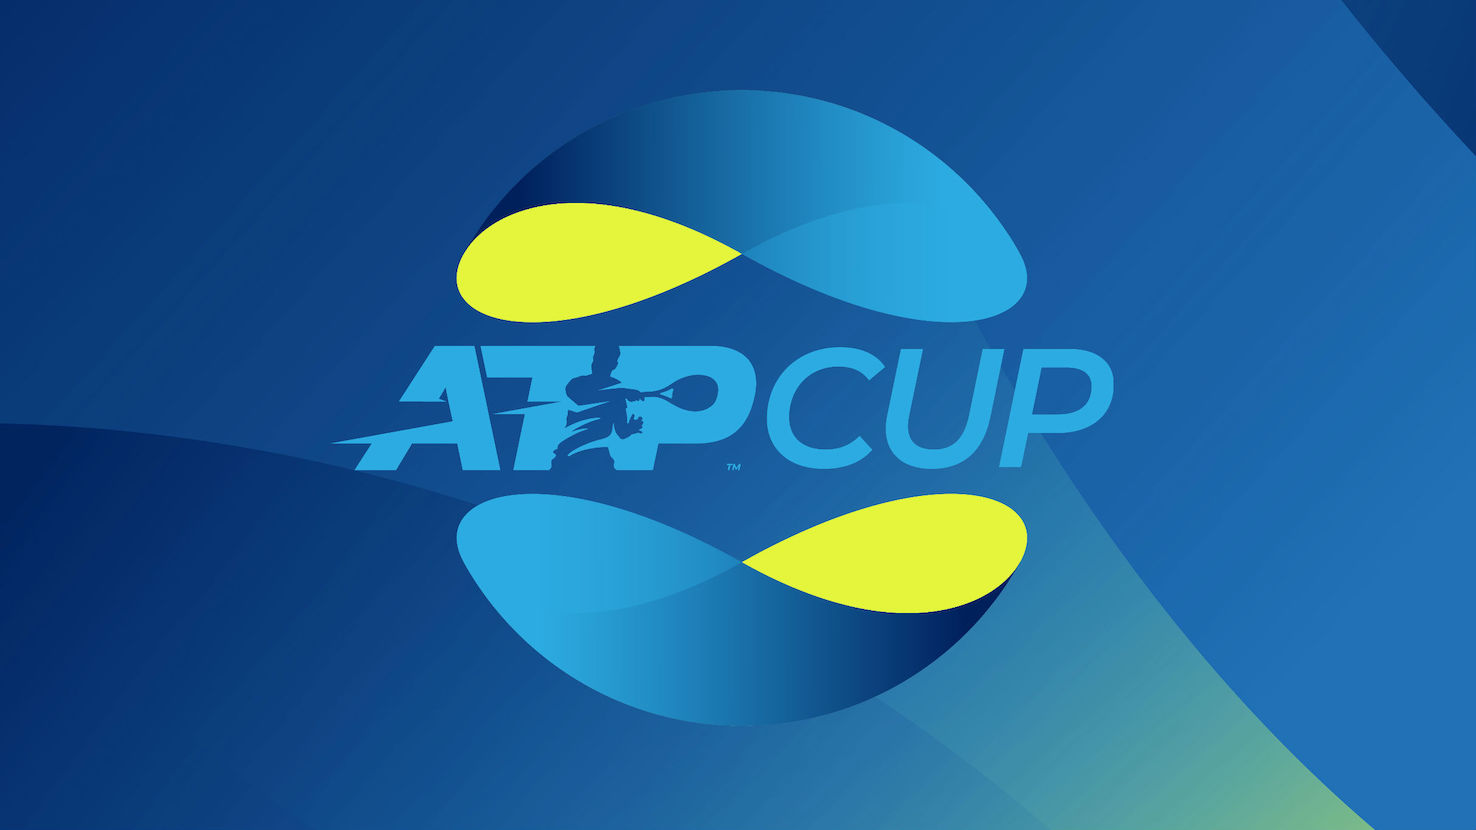 Atp cup